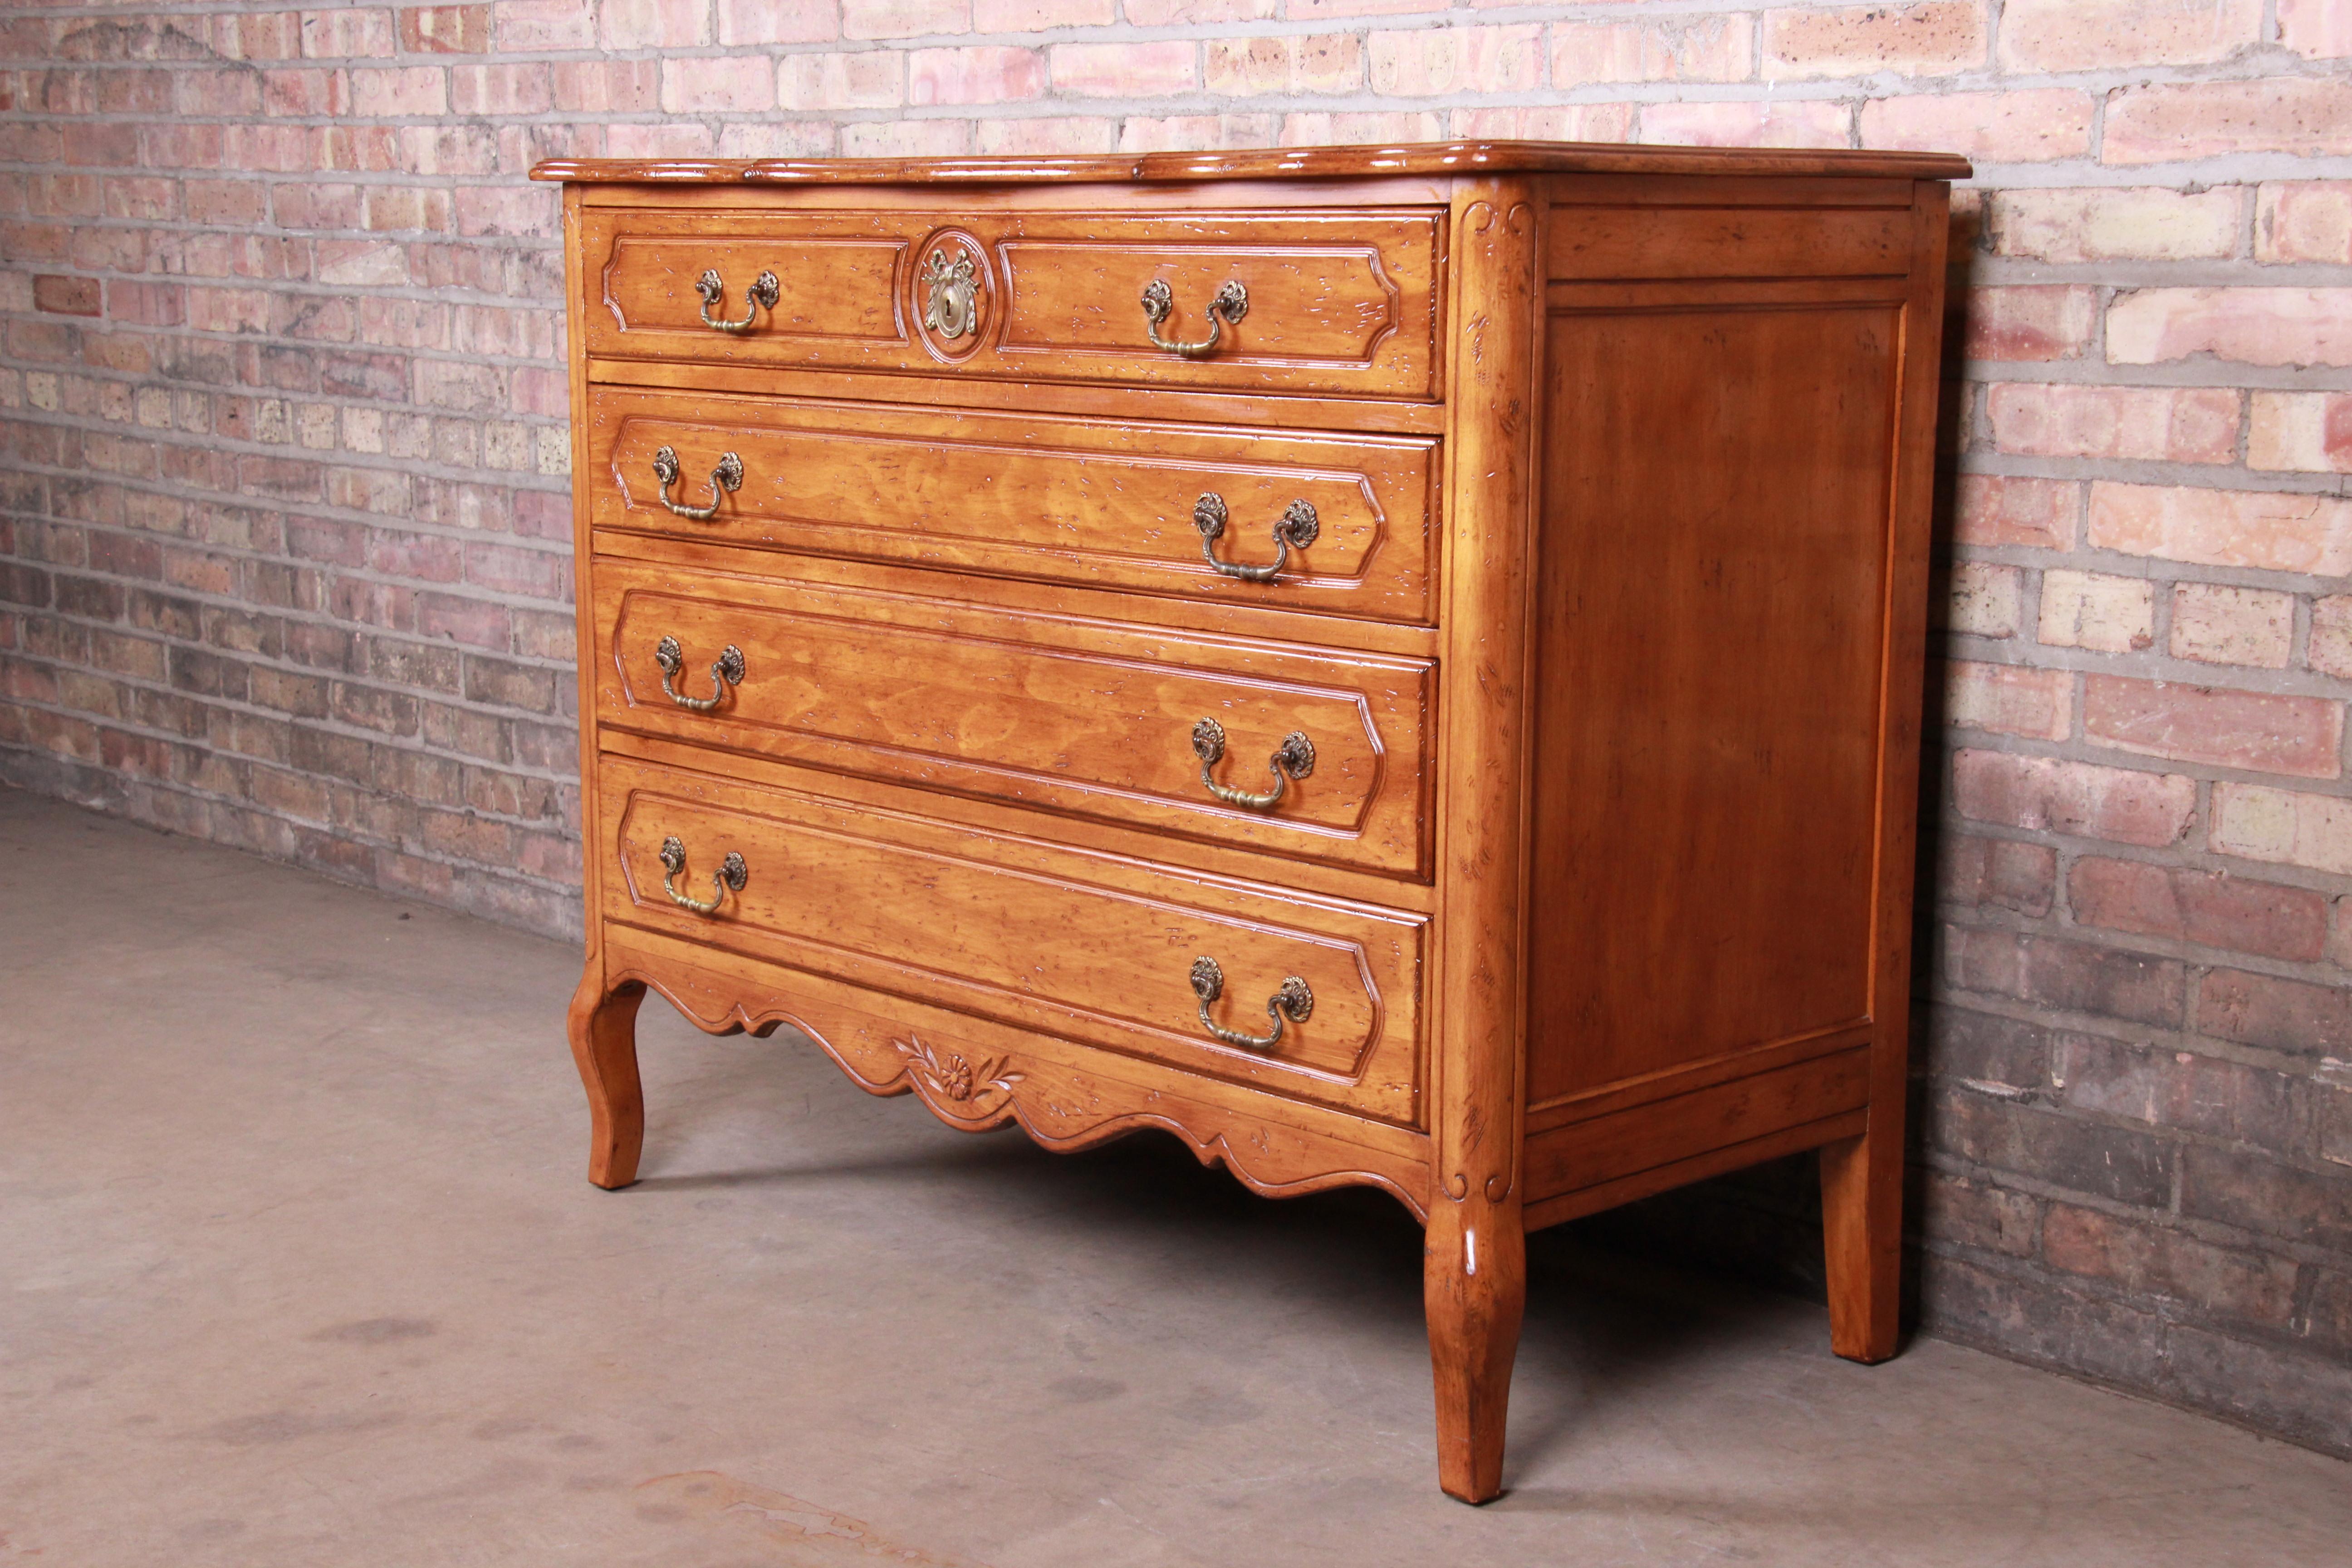 A gorgeous French Provincial Louis XV carved fruitwood four-drawer dresser or chest of drawers,

mid-20th century

Measures: 44.25